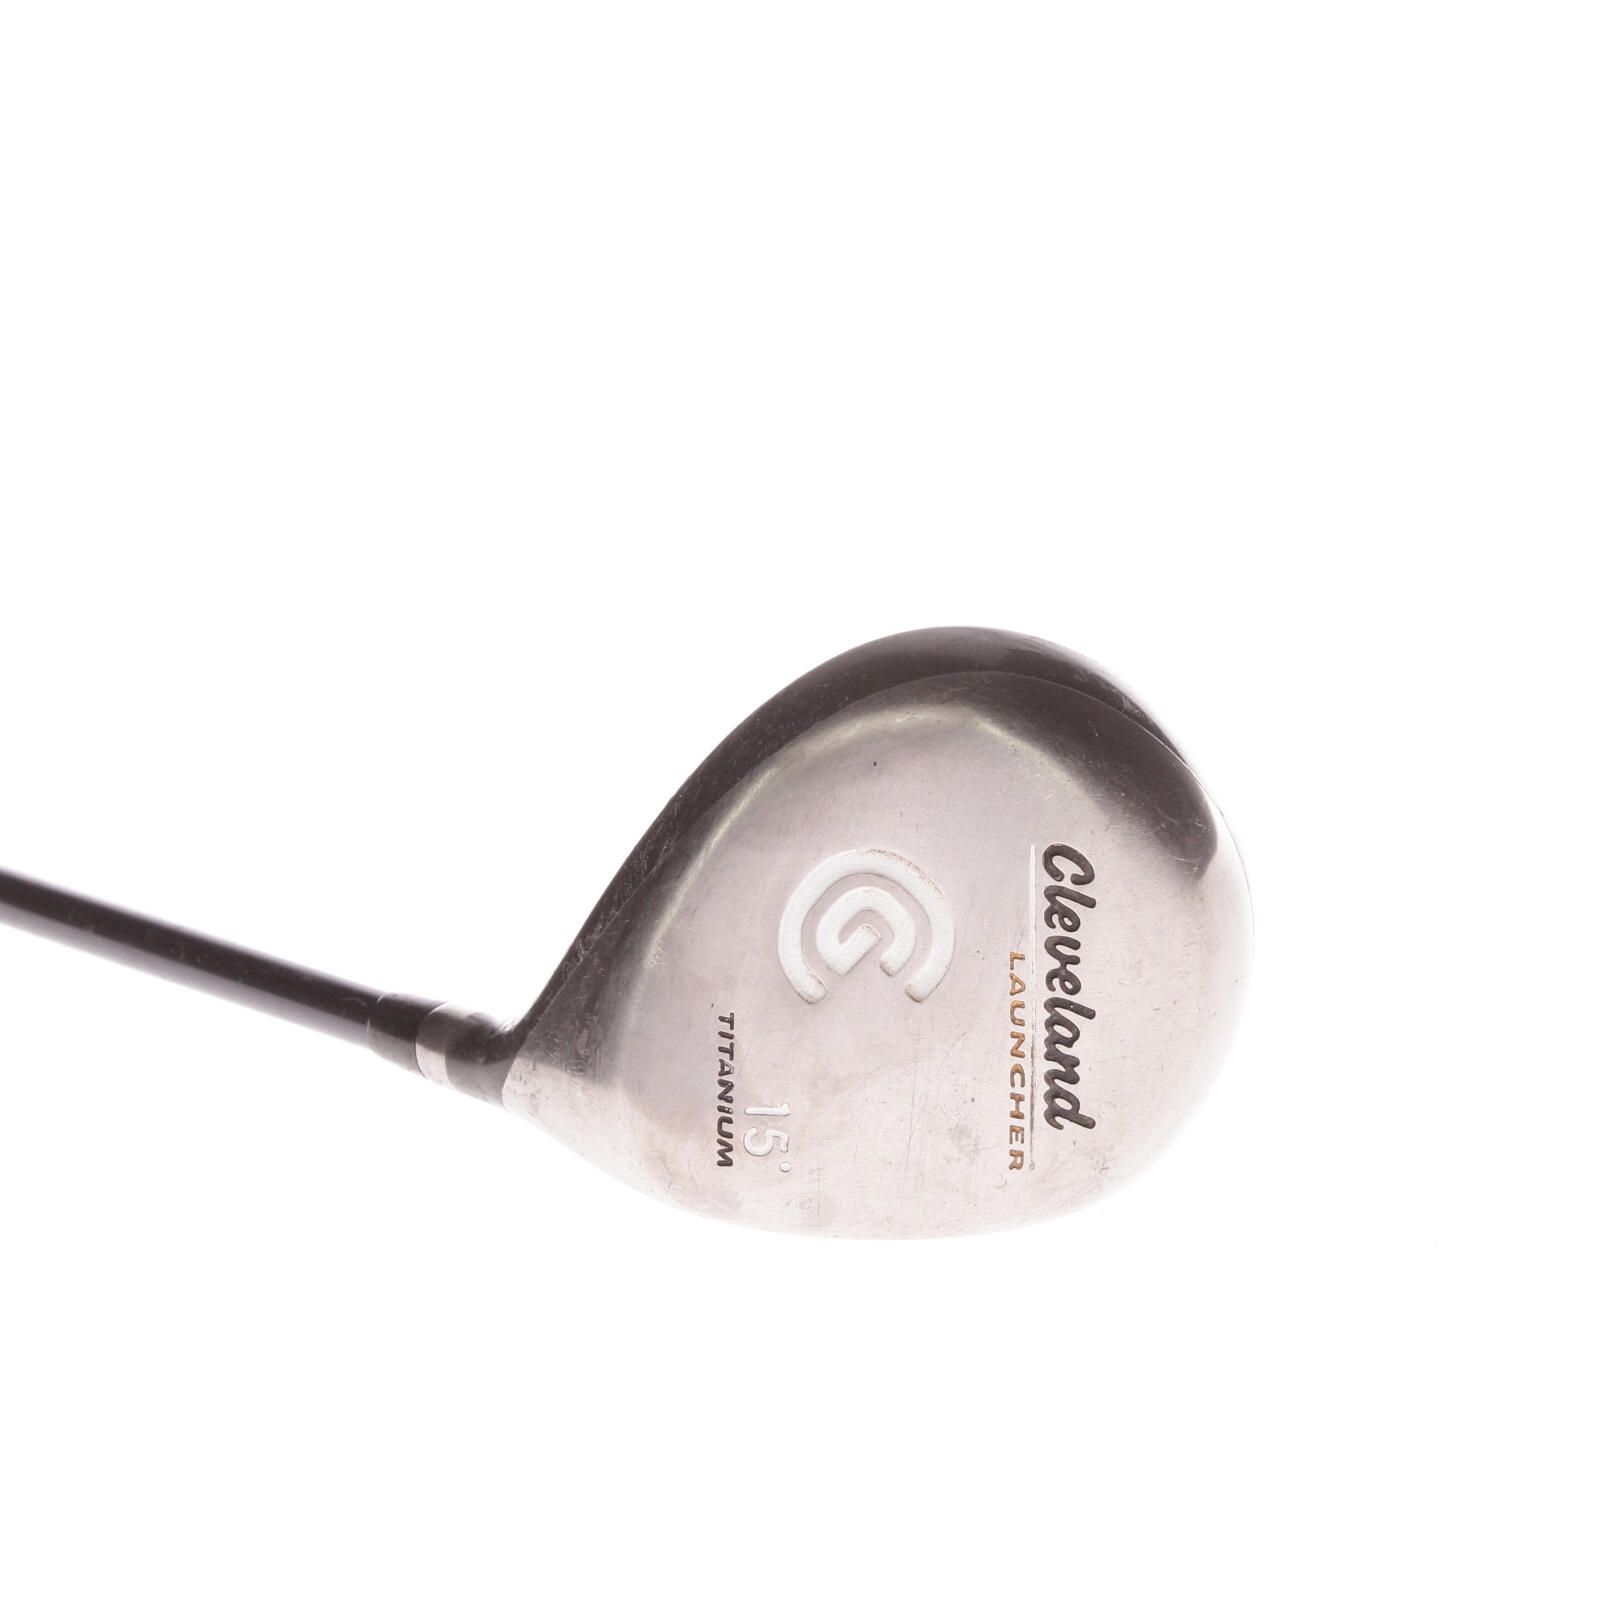 CLEVELAND GOLF USED - Fairway 3 Wood Cleveland Cleveland Launcher 15* Graphite Shaft - GRADE D